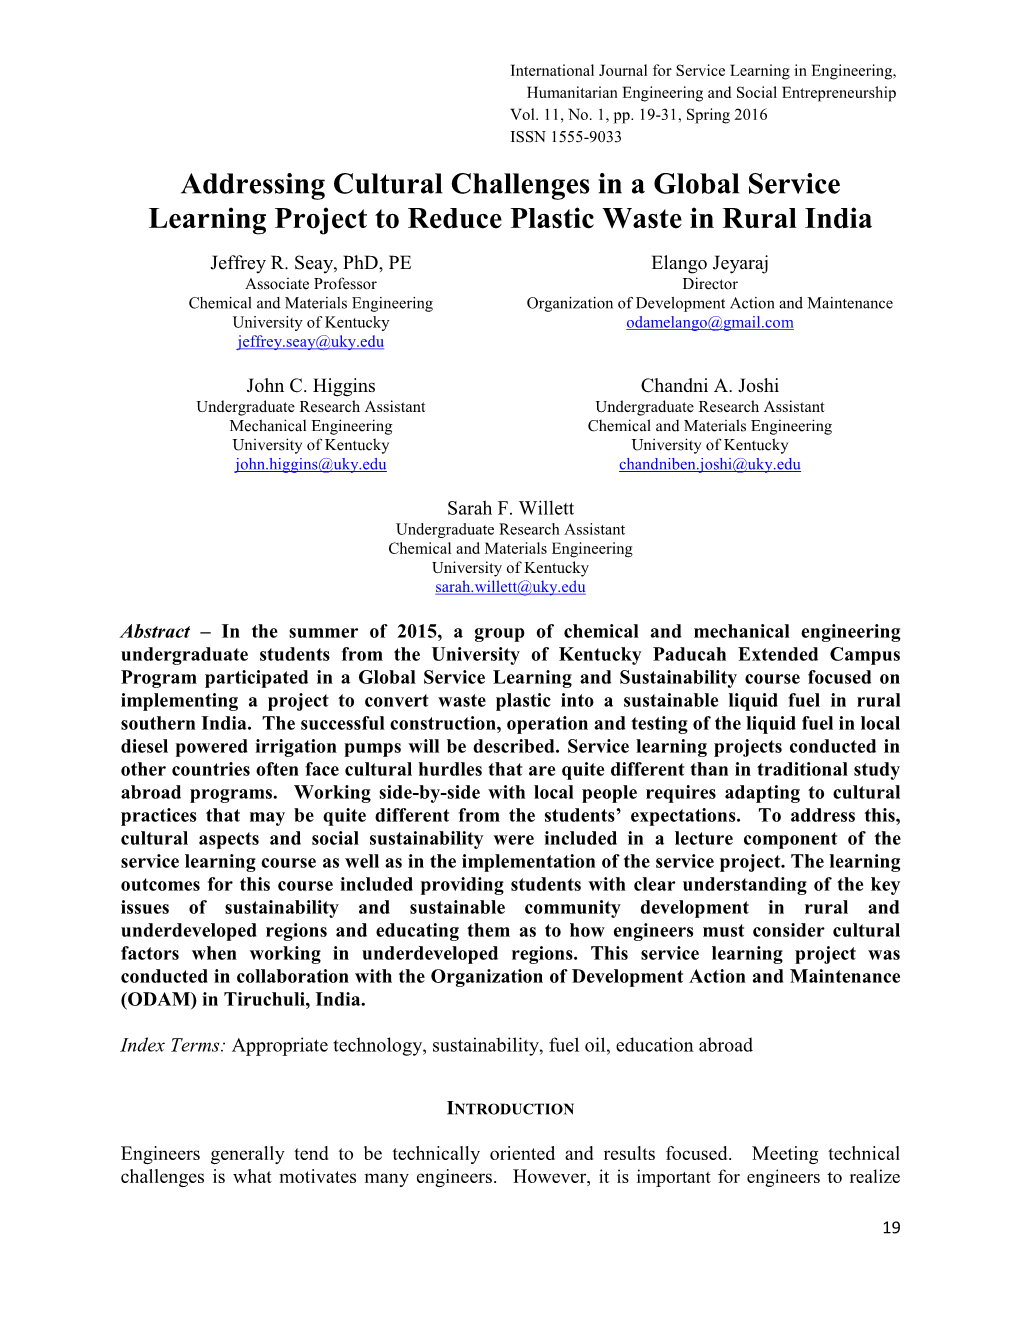 Addressing Cultural Challenges in a Global Service Learning Project to Reduce Plastic Waste in Rural India Jeffrey R